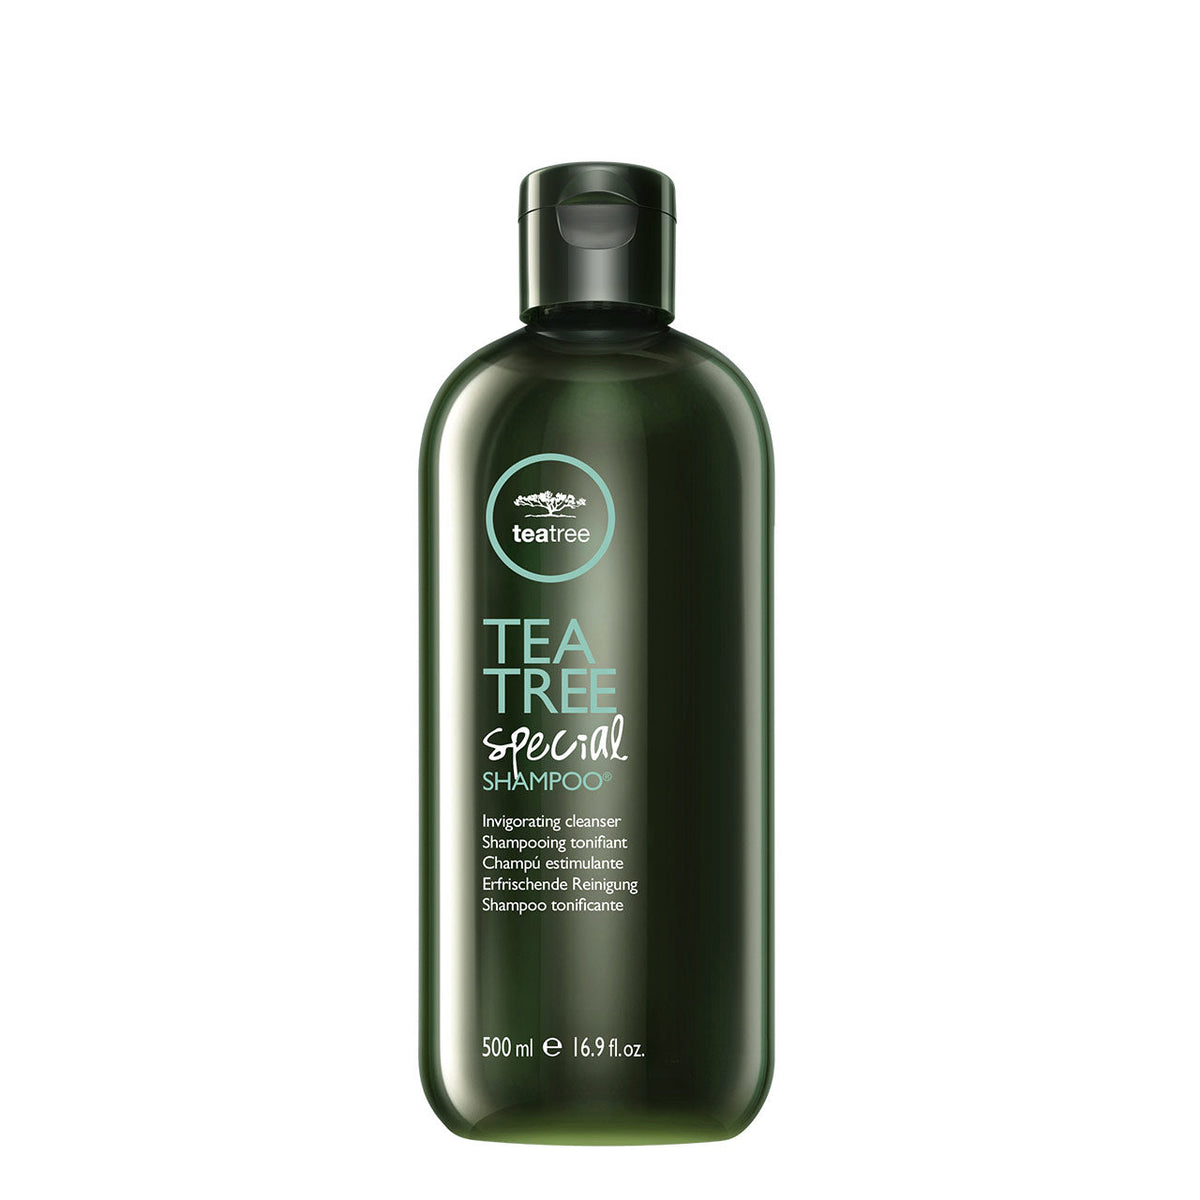 Tea Tree Special Shampoo - 500ML - by Paul Mitchell |ProCare Outlet|